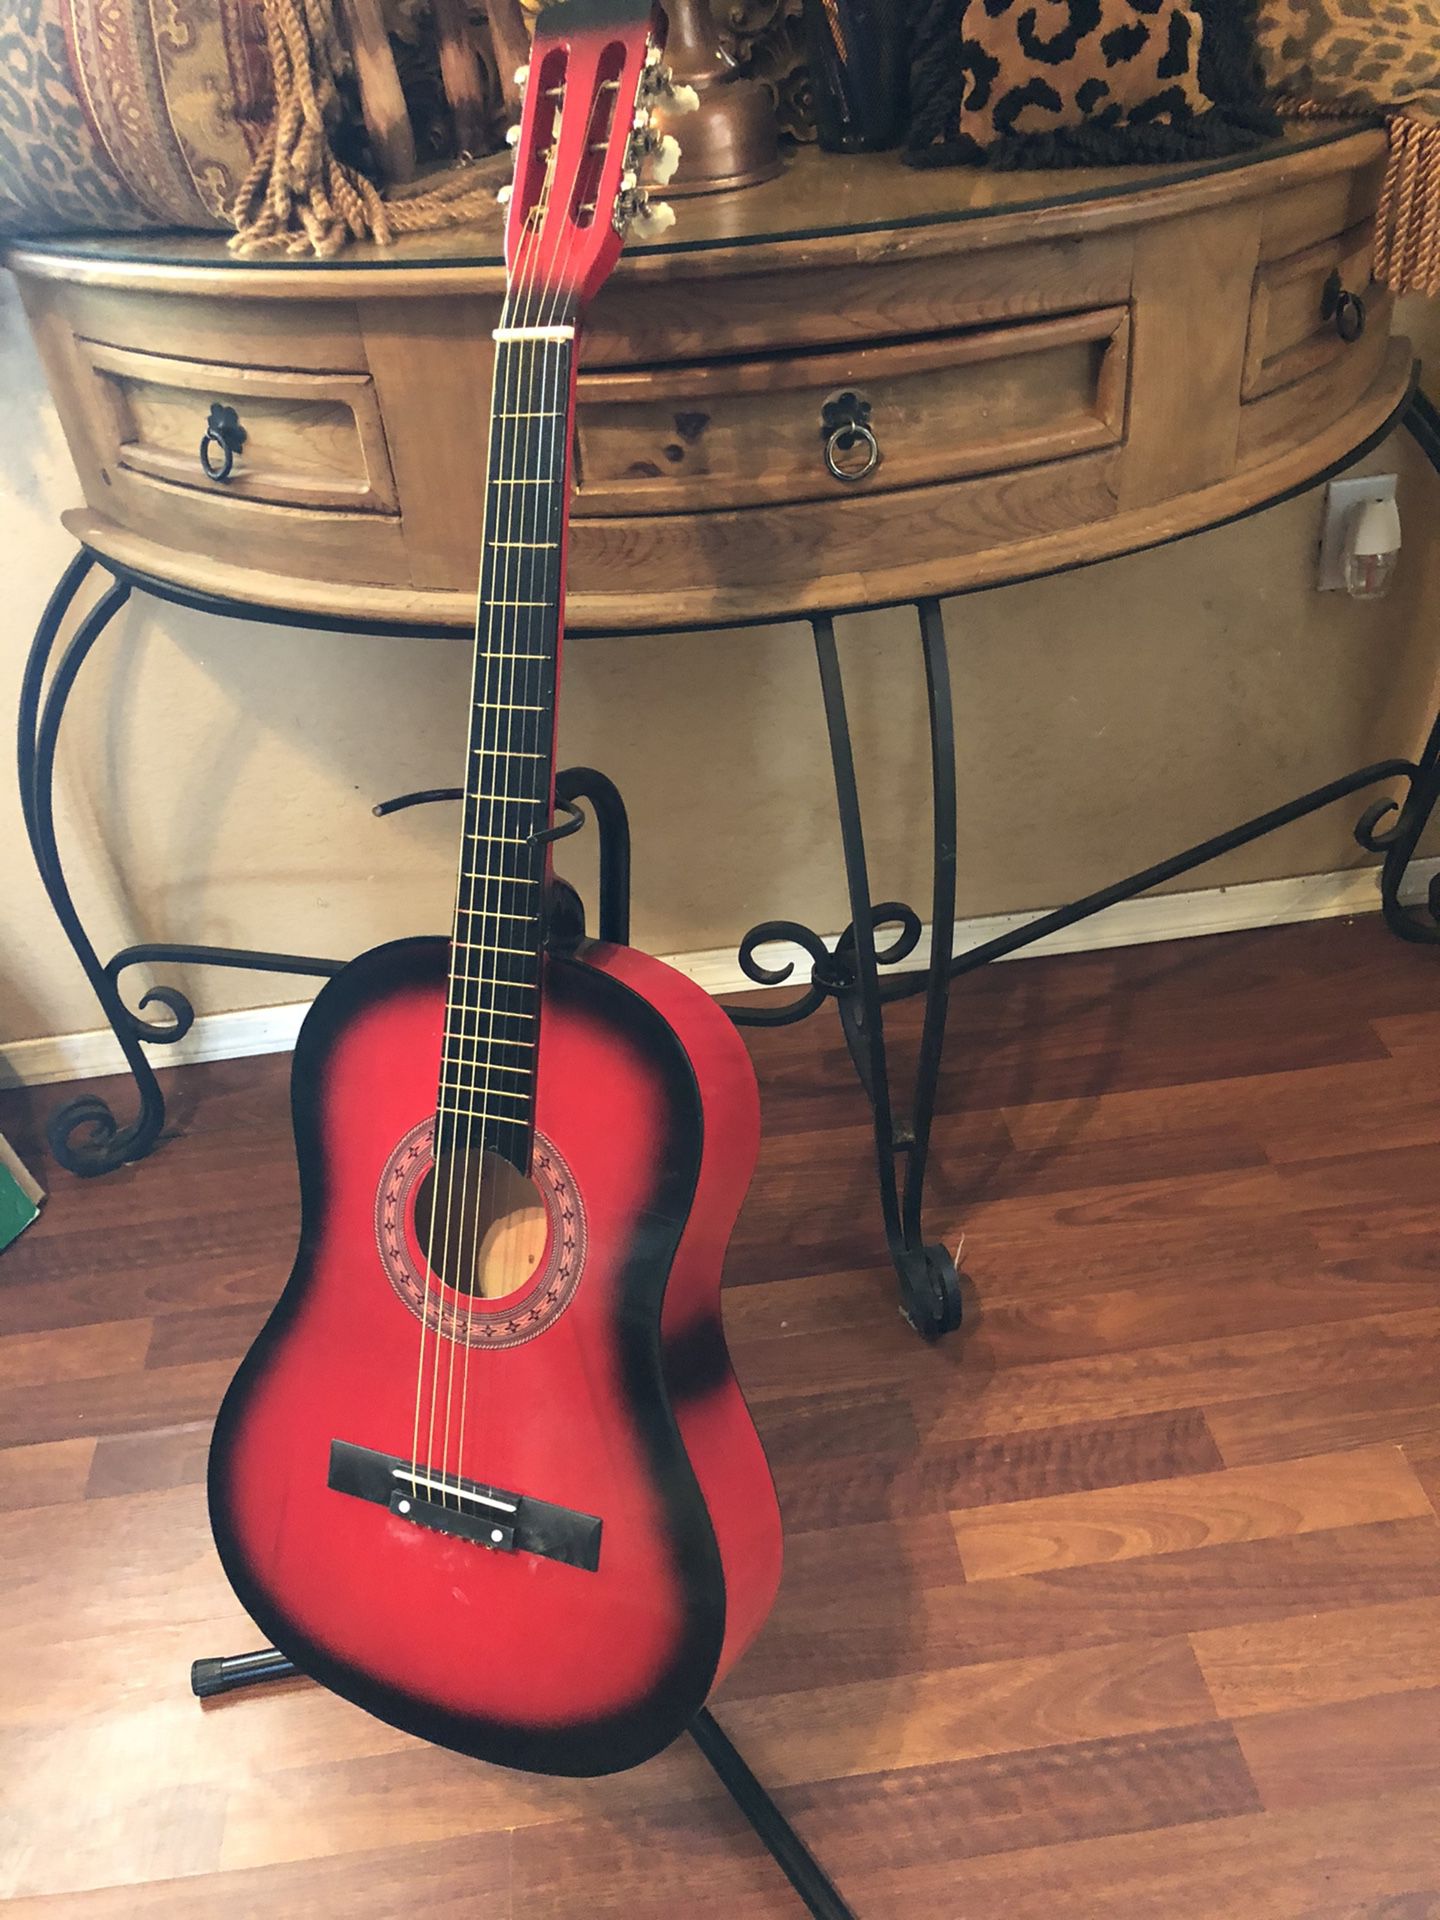 Guitar. Crack on neck. Works perfect brand new. $35